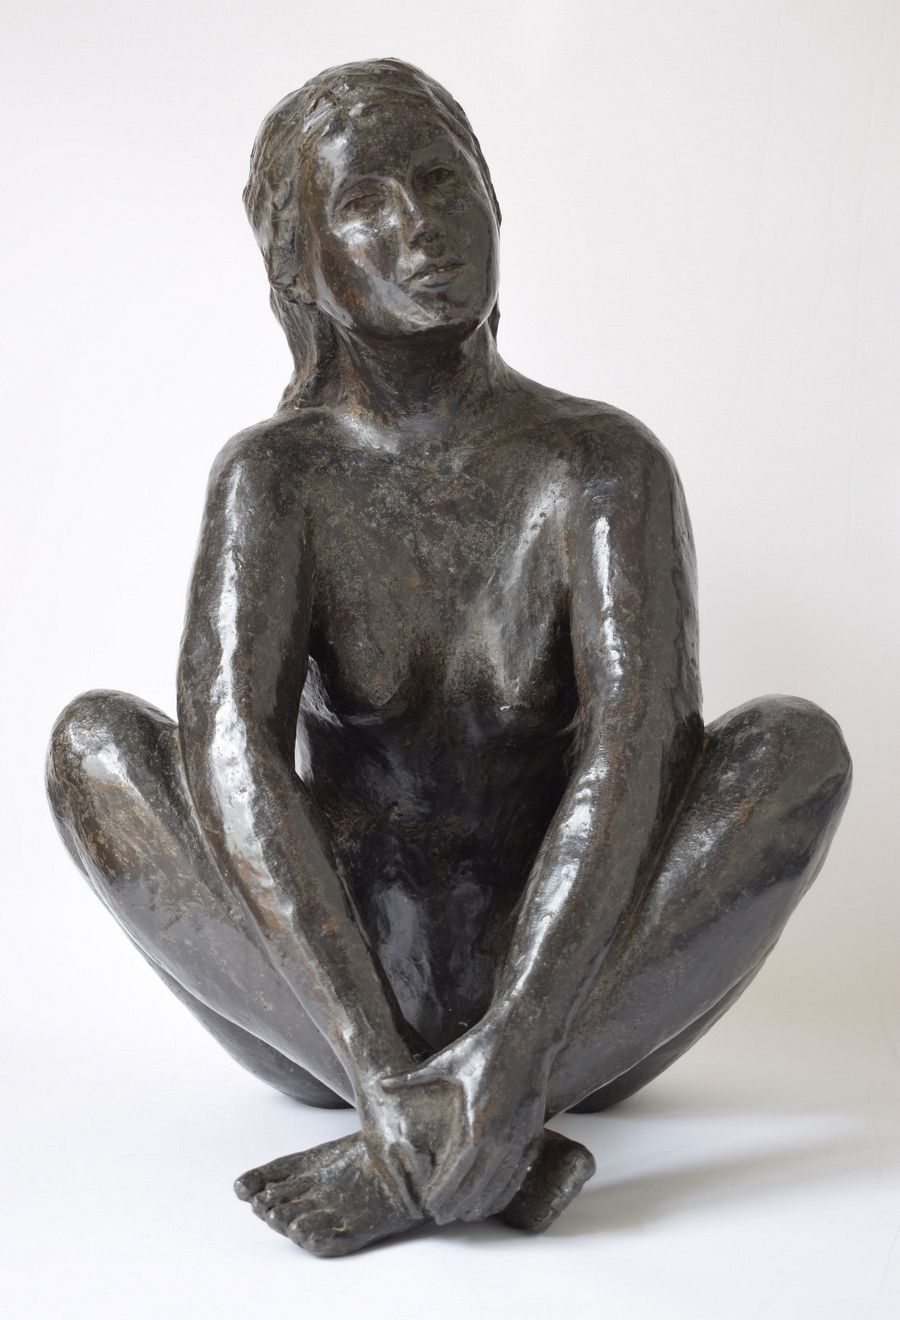 Null Sitting nude. Bronze sculpture with green patina. 50 x 35 x 35.